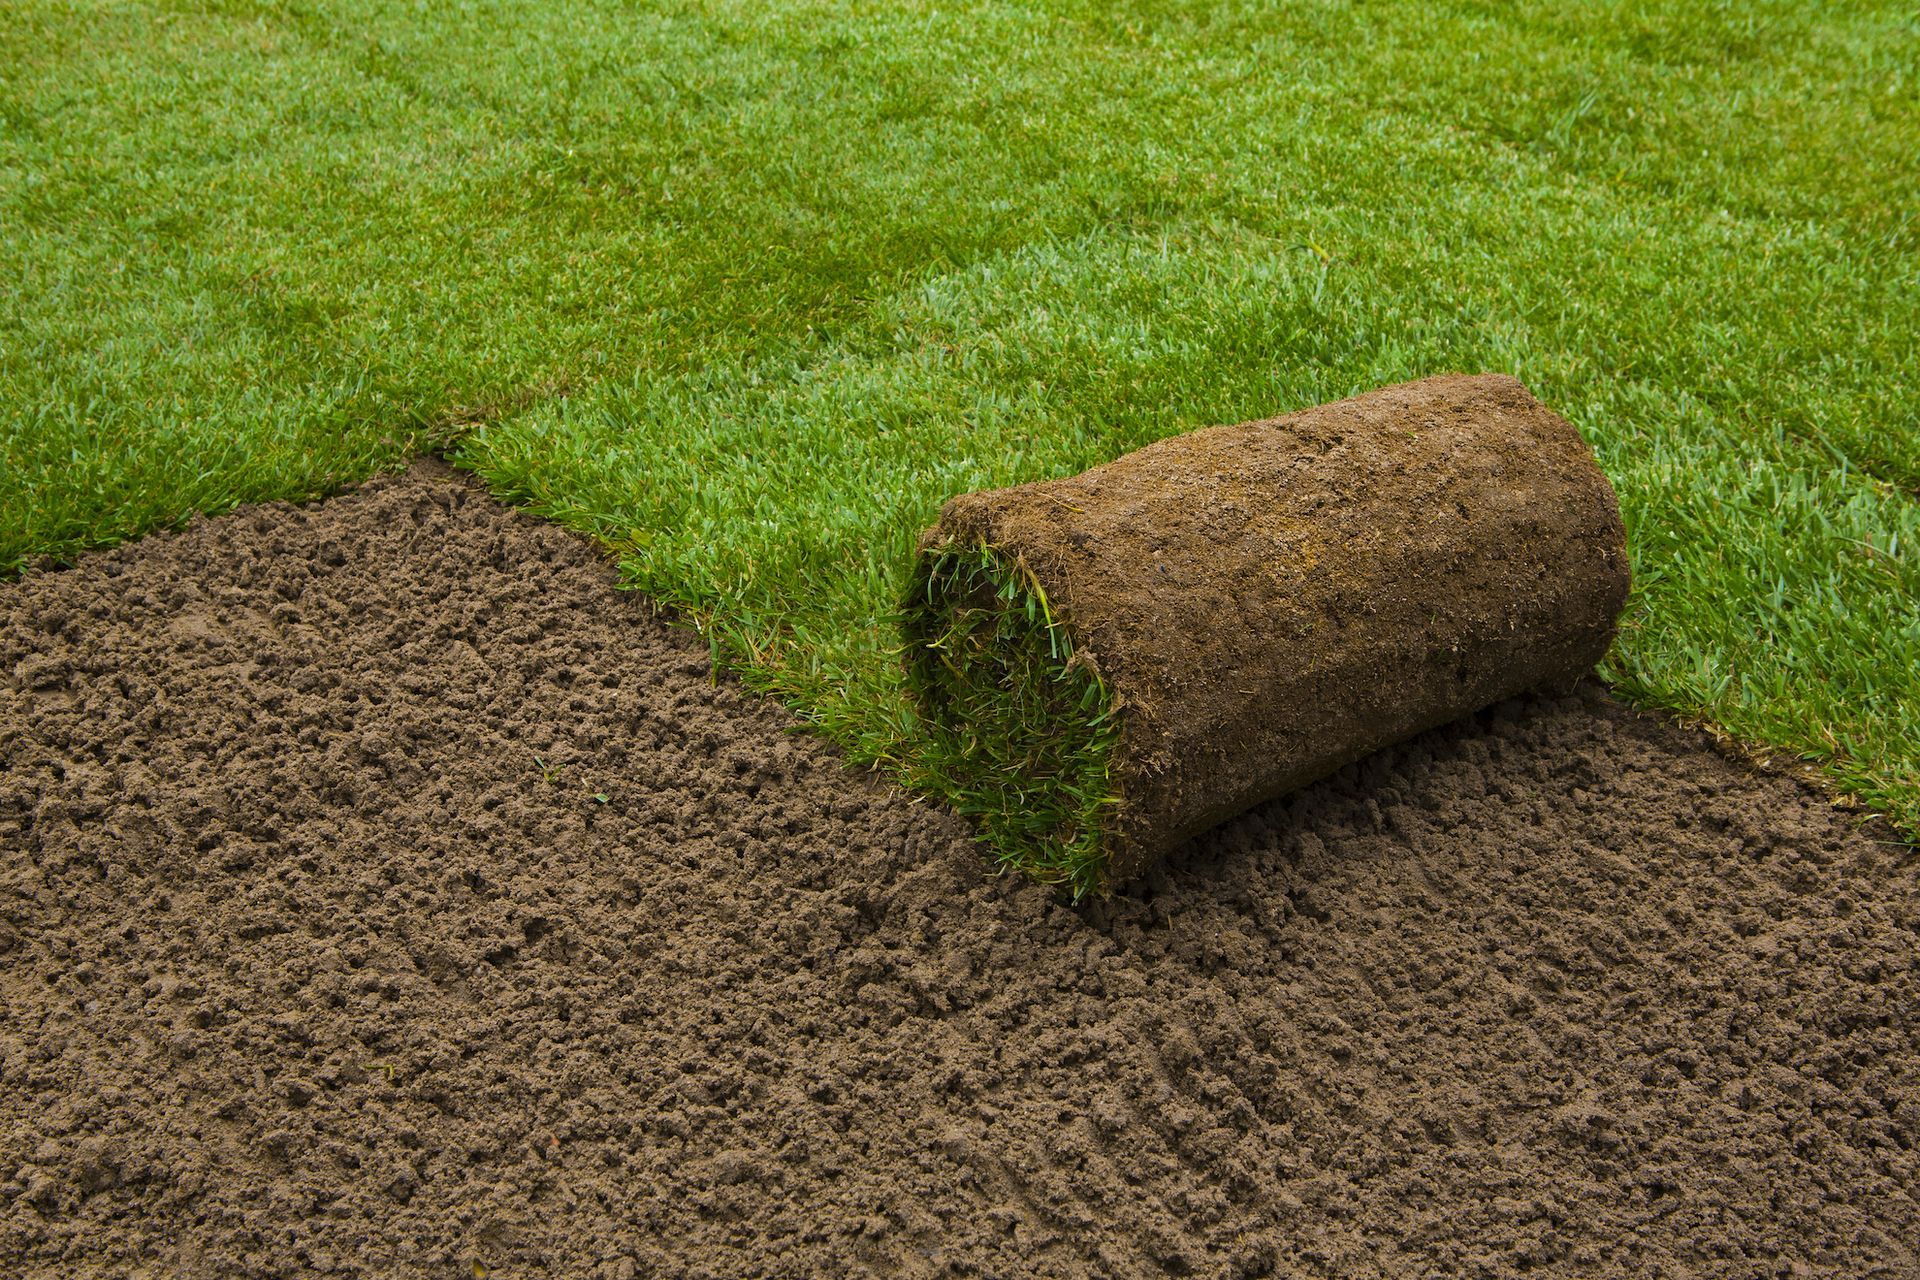 A roll of sod is sitting on top of a lush green lawn.